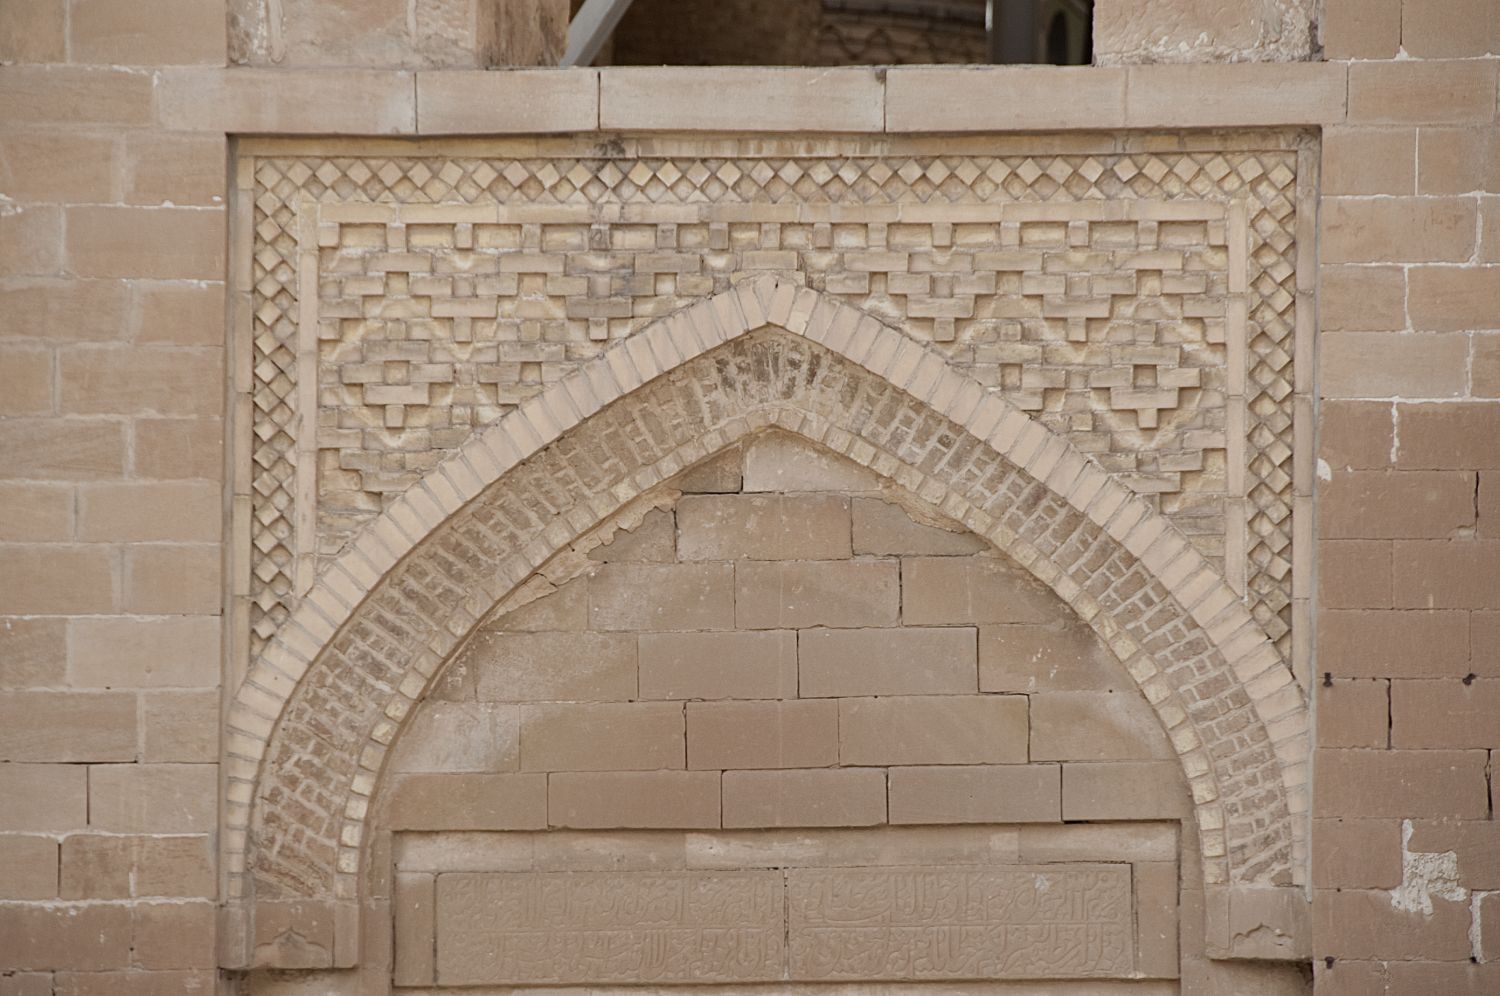 View of a lunette and spandrel decoration in brick over a portal.&nbsp;